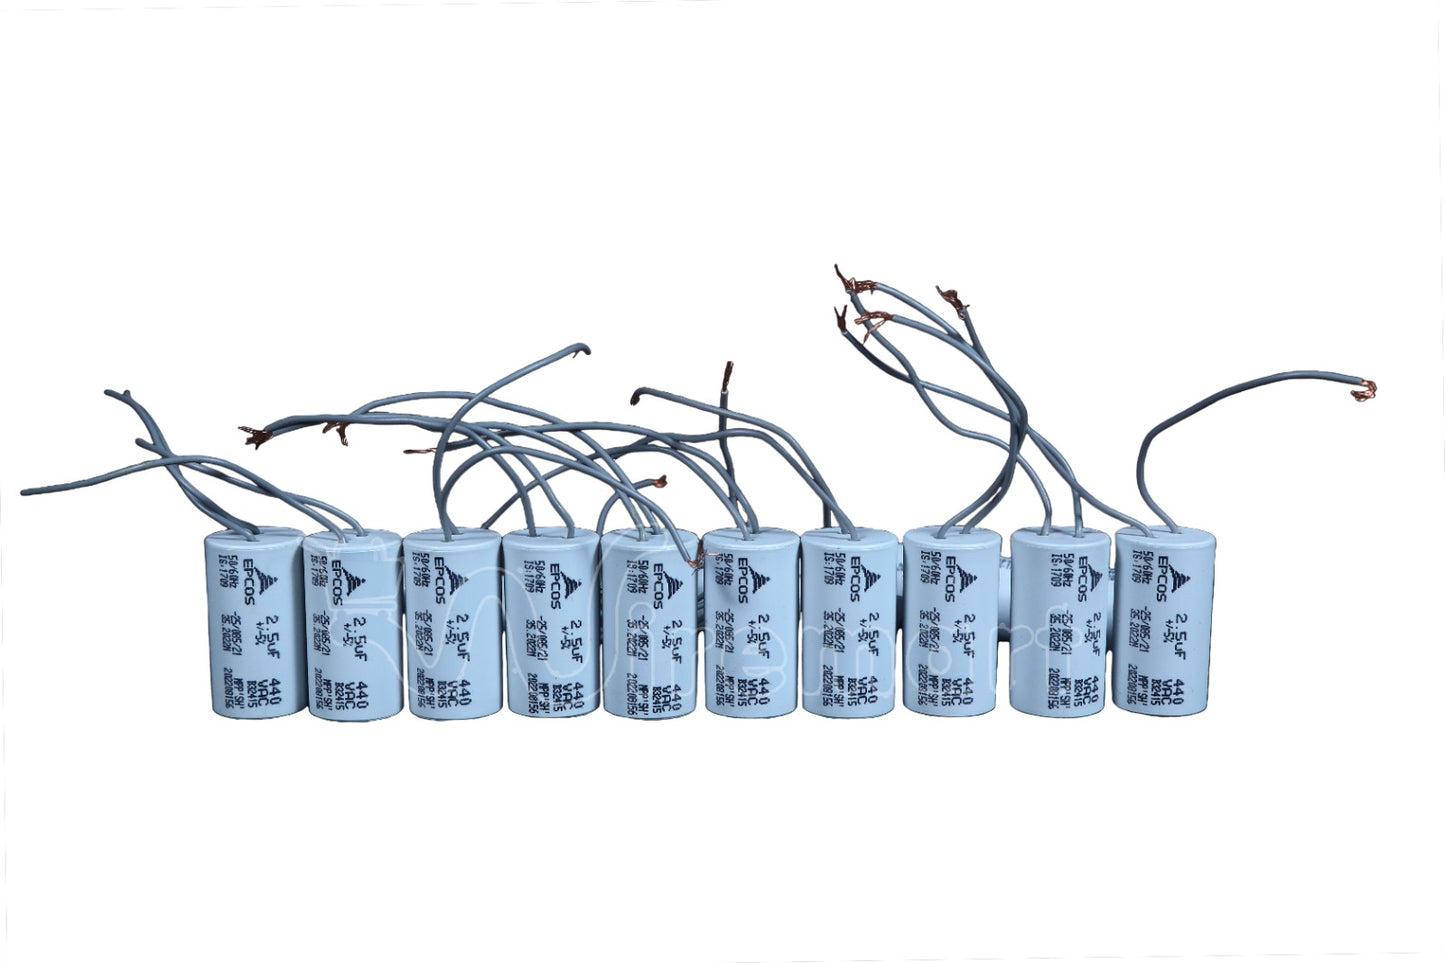 EPCOS Fan Capacitor - Supreme Quality - 100 Pieces/Box